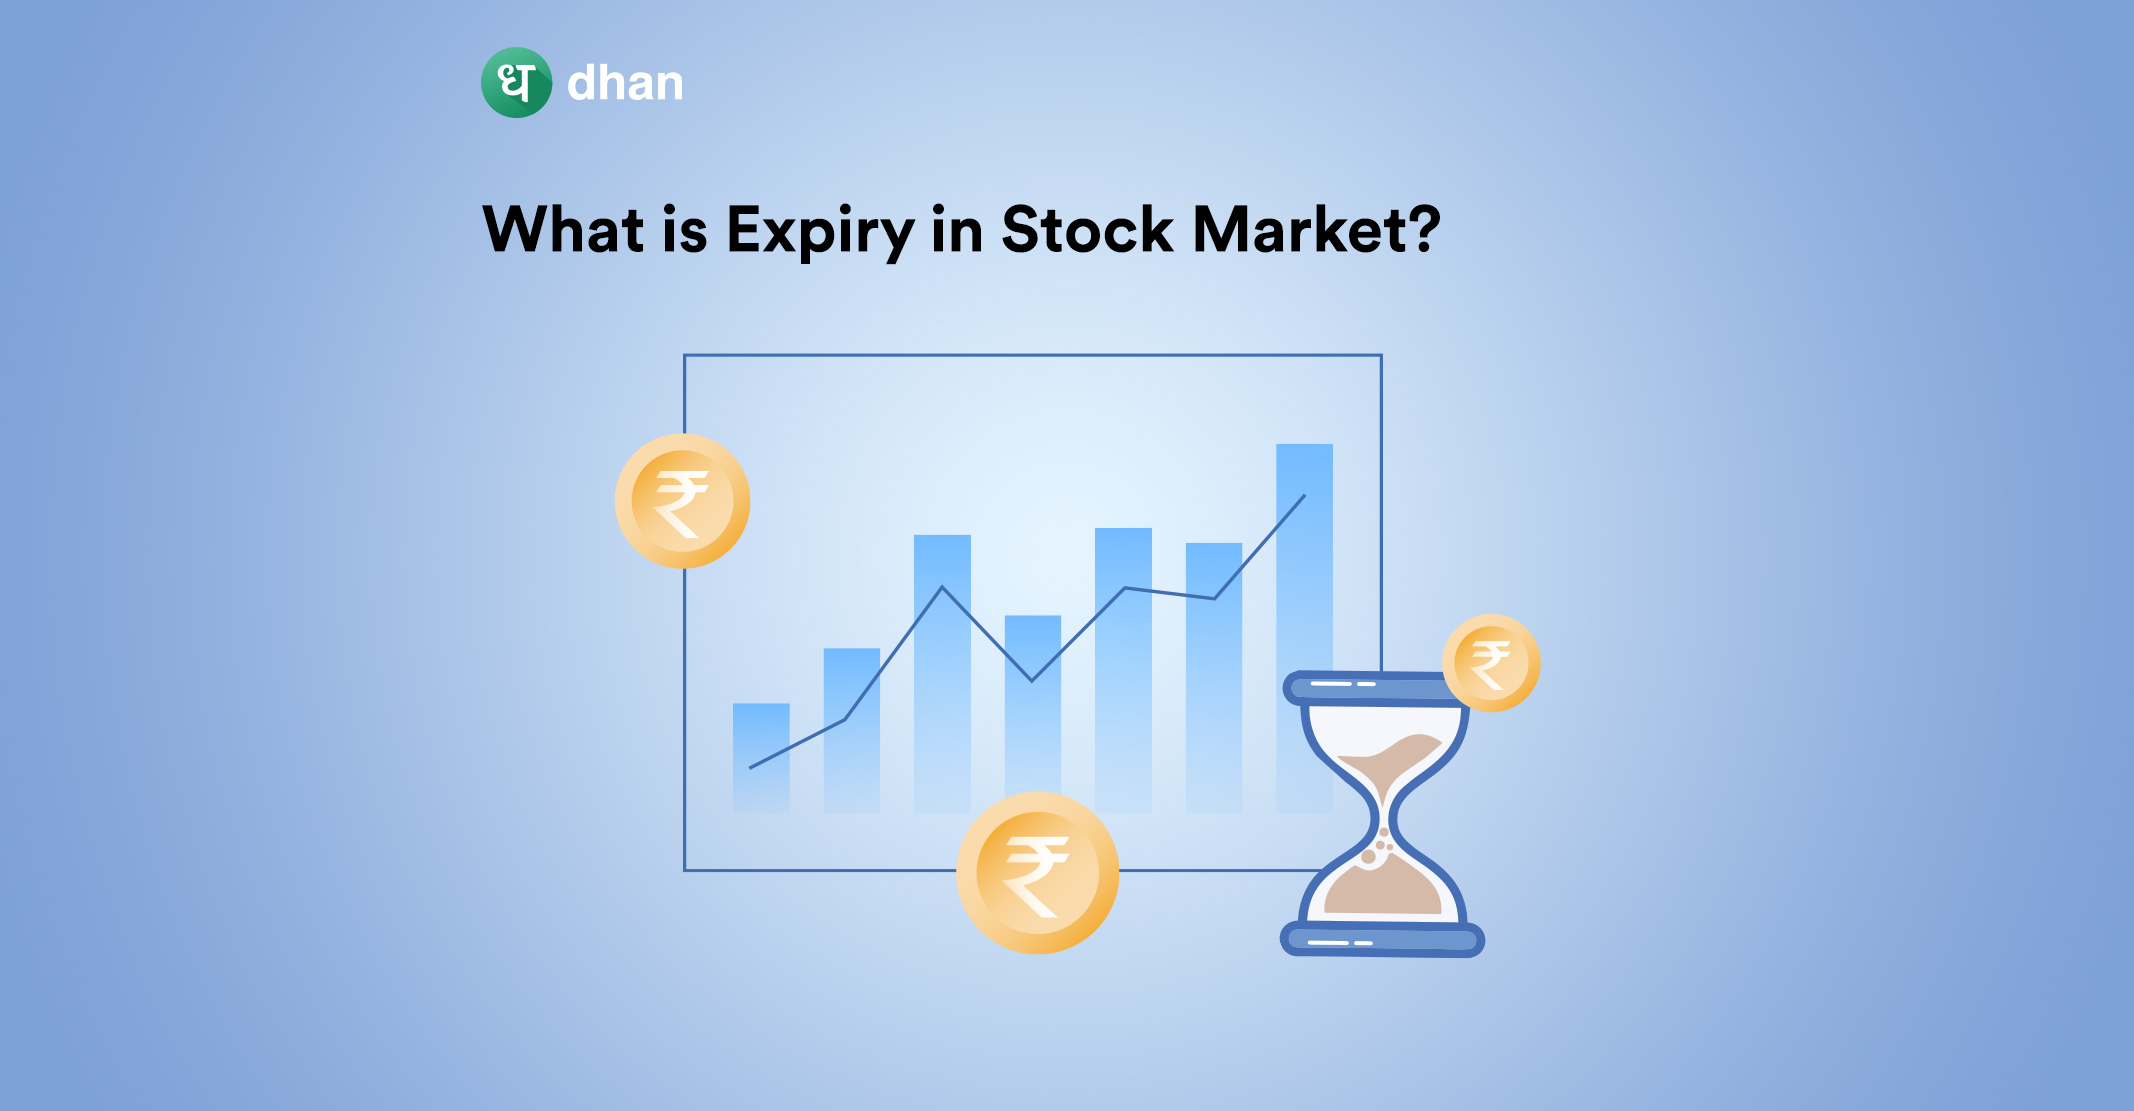 What is Expiry in Stock Market